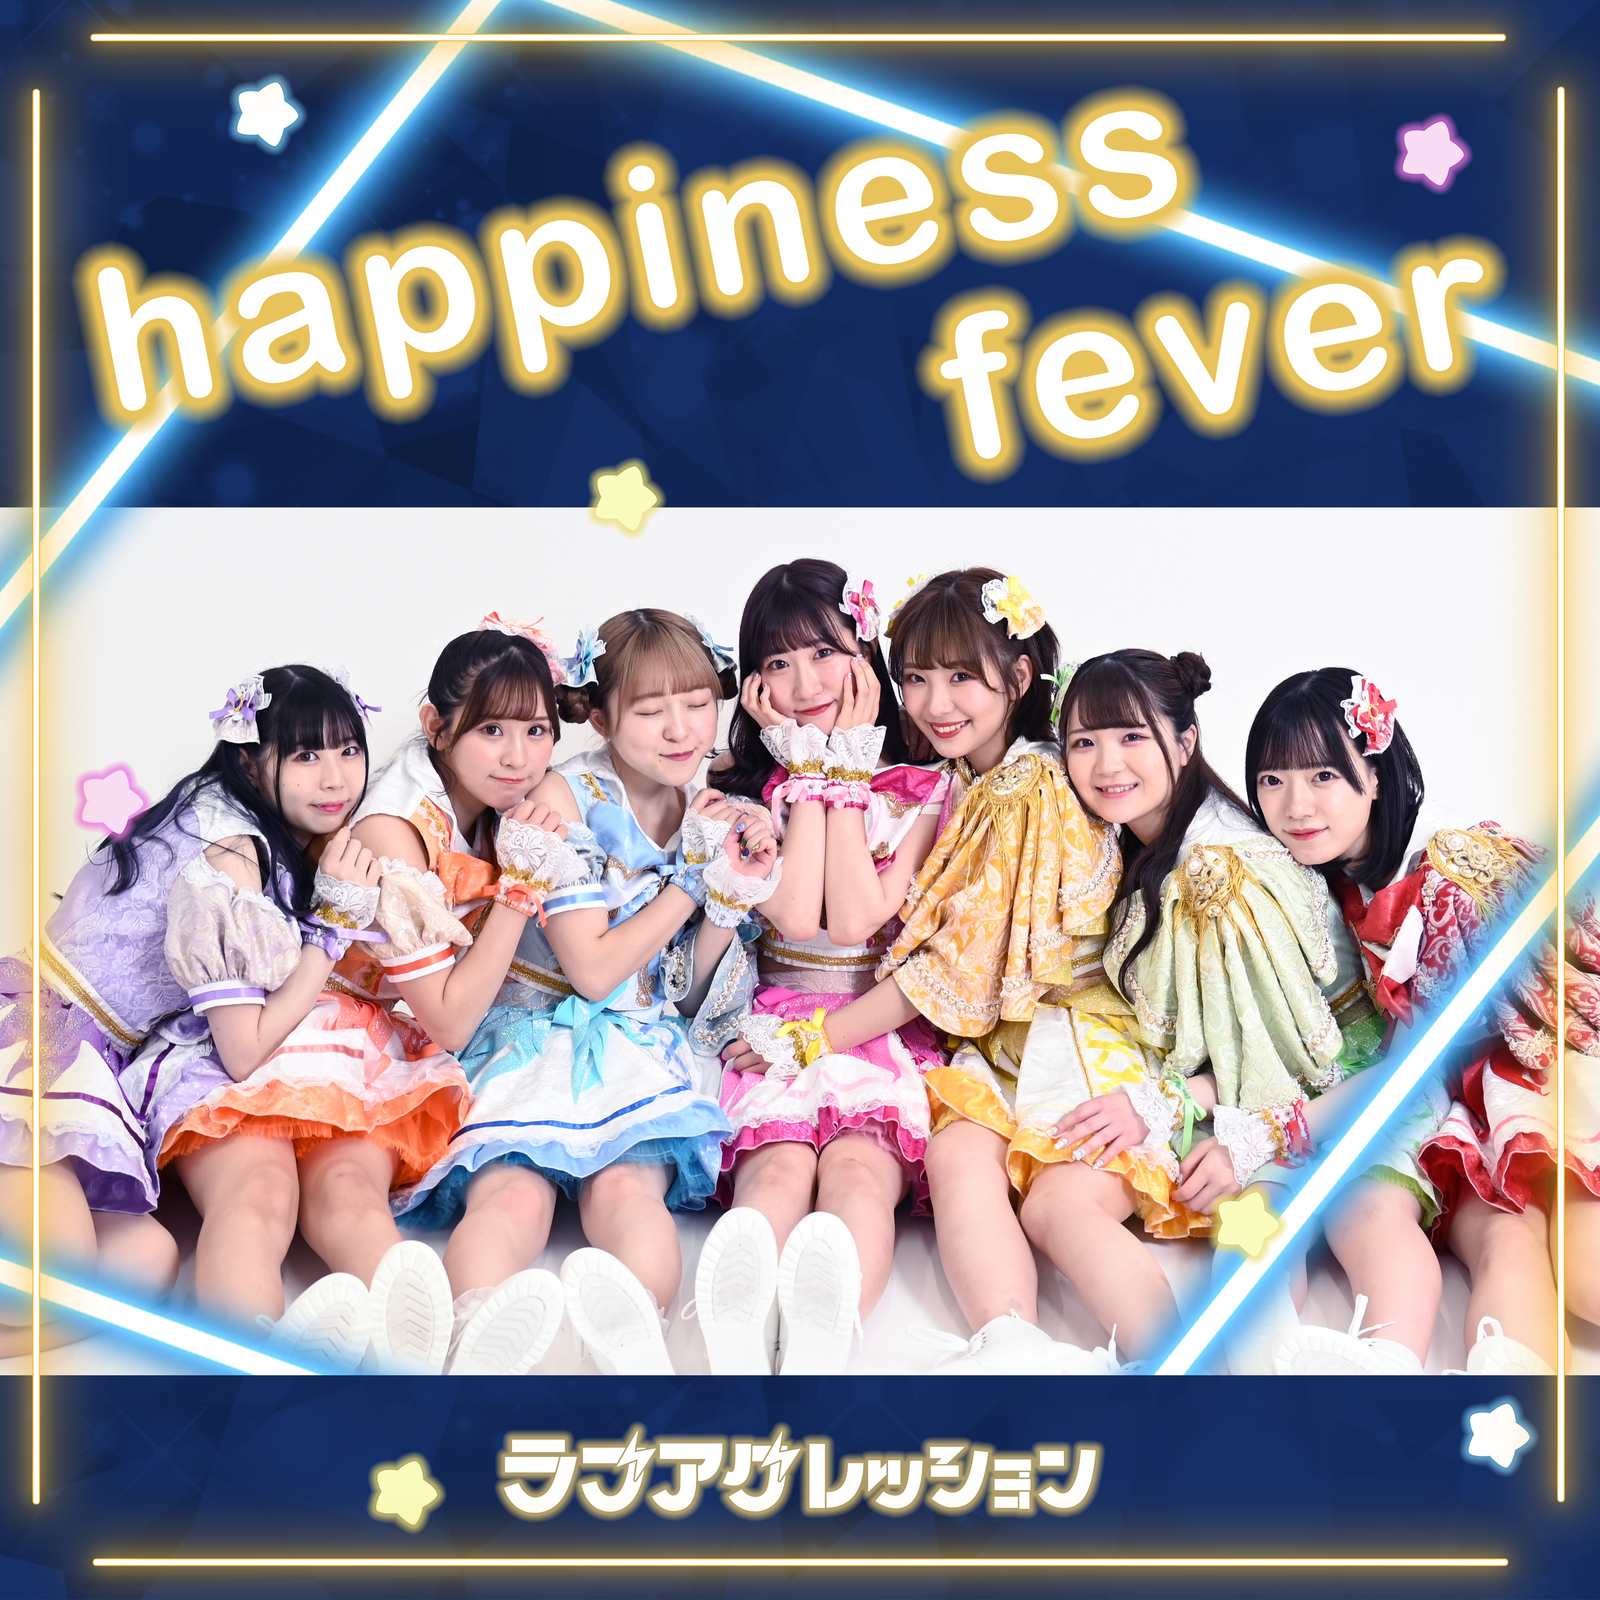 Happiness Fever